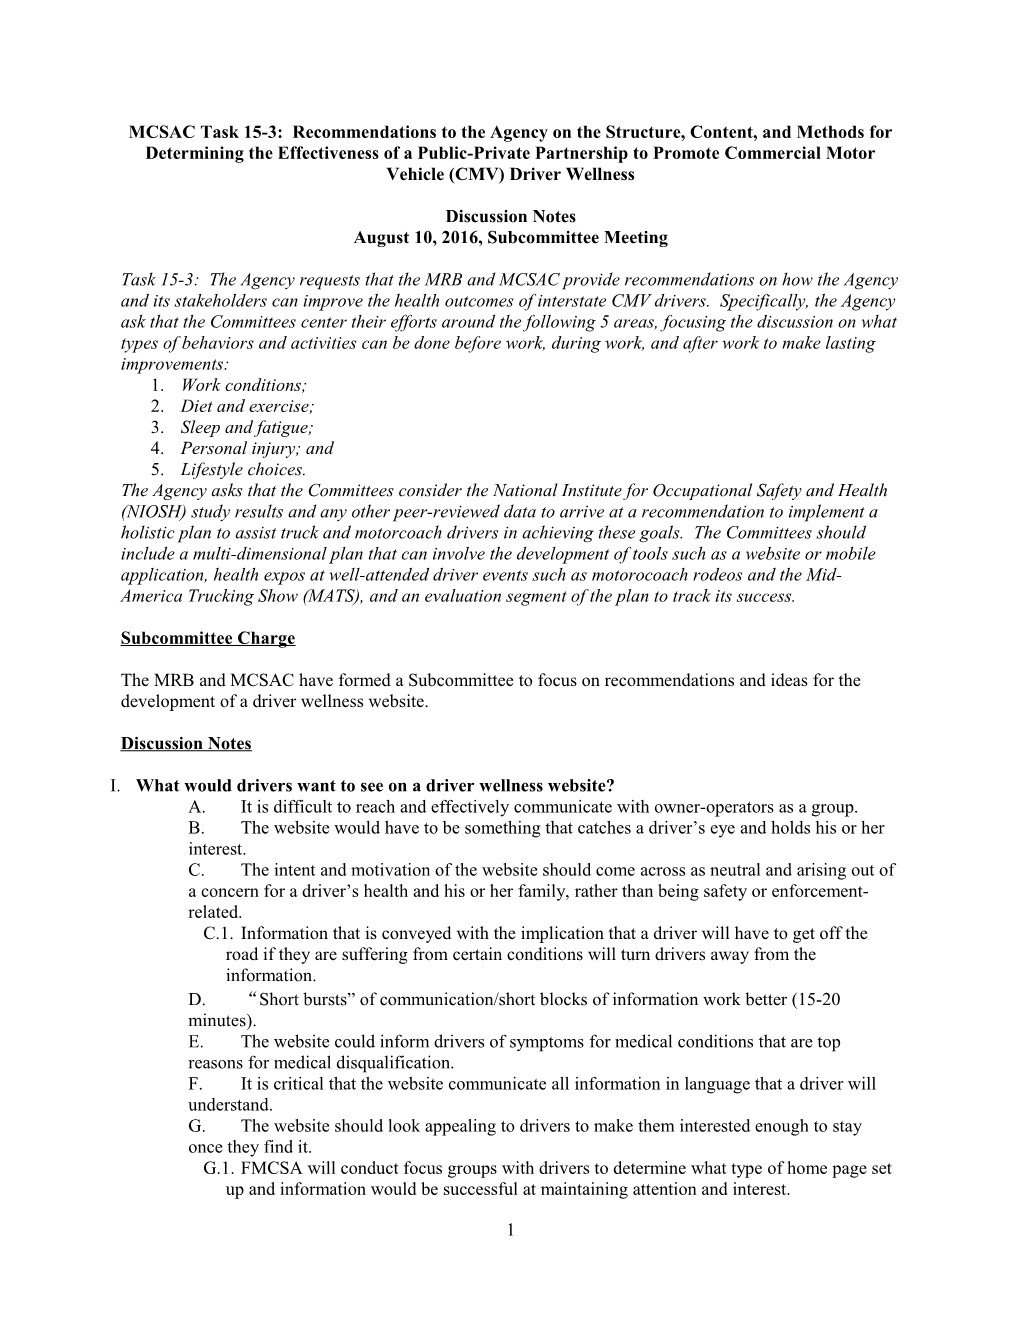 MCSAC Task 15-3: Recommendations to the Agency on the Structure, Content, and Methods